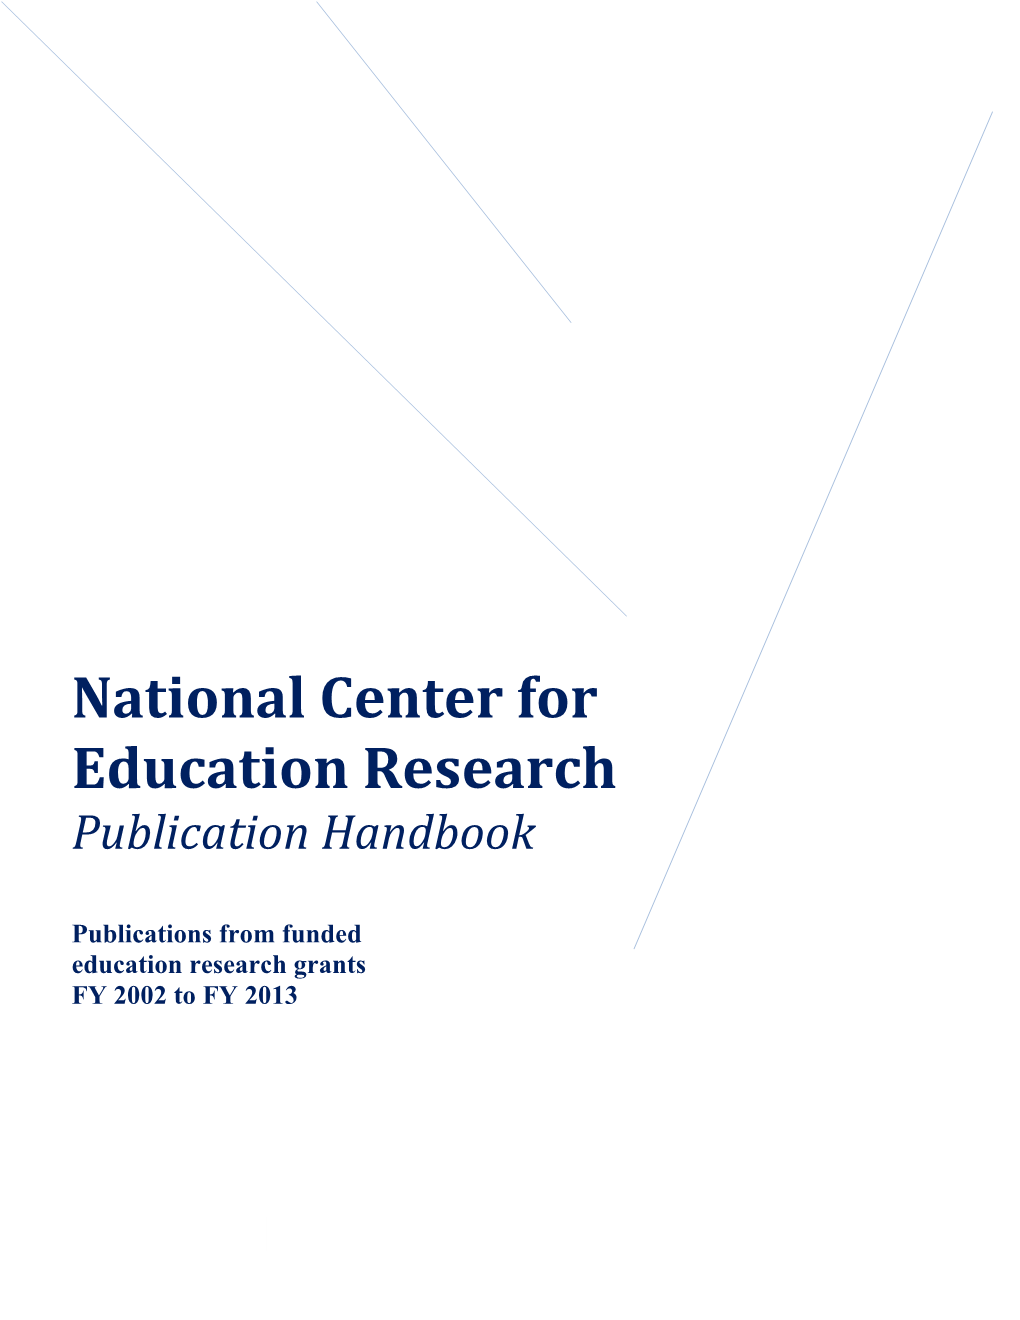 National Center for Education Research Publication Handbook